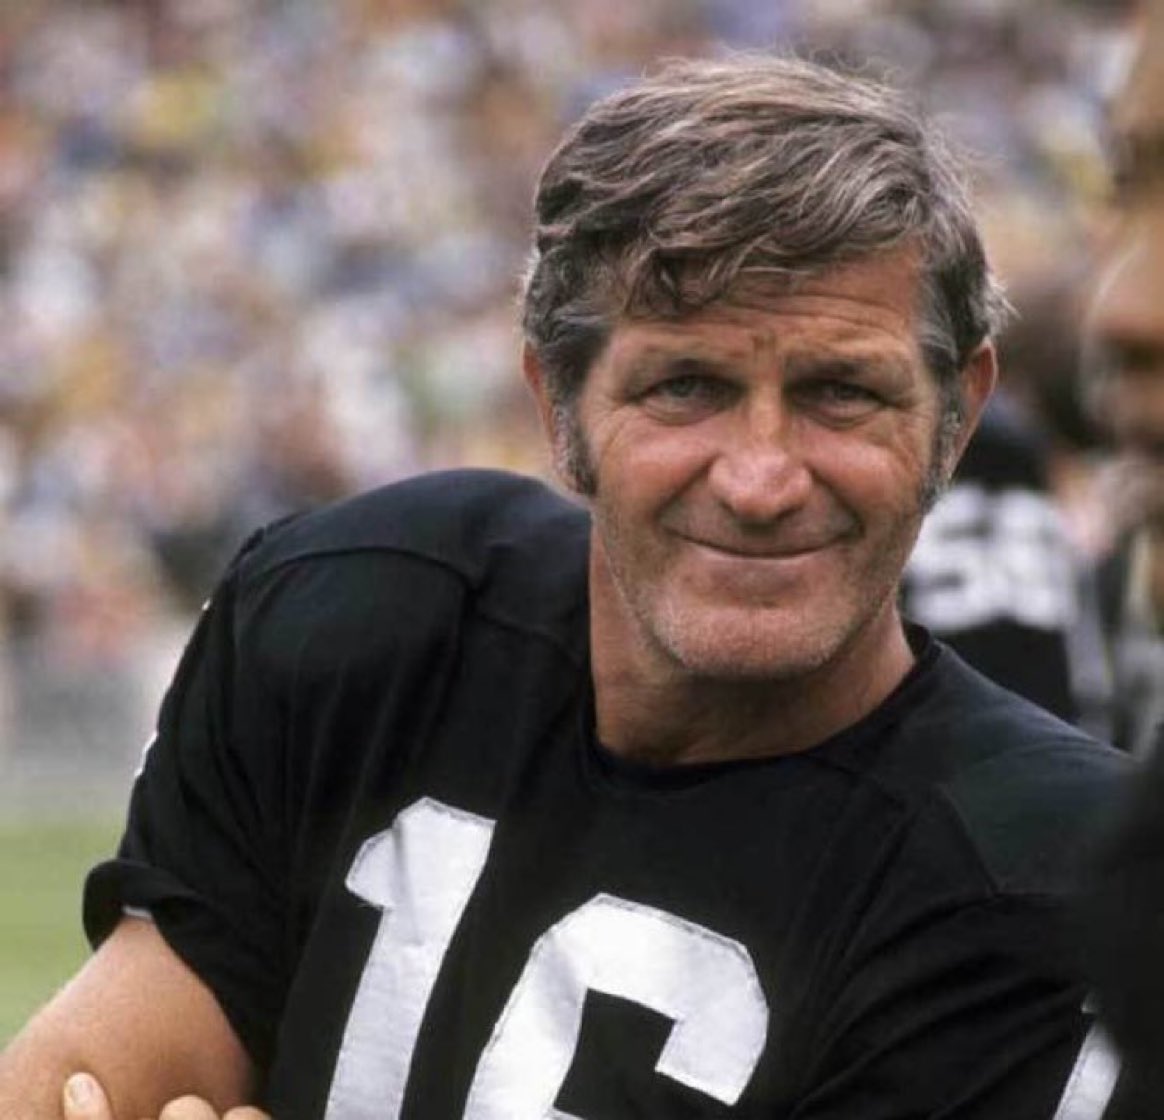 George Blanda once dropped back for a pass, wounded a redcoat with his musket, then completed a 20-yard post route to Fred Biletnikoff. Good protection.